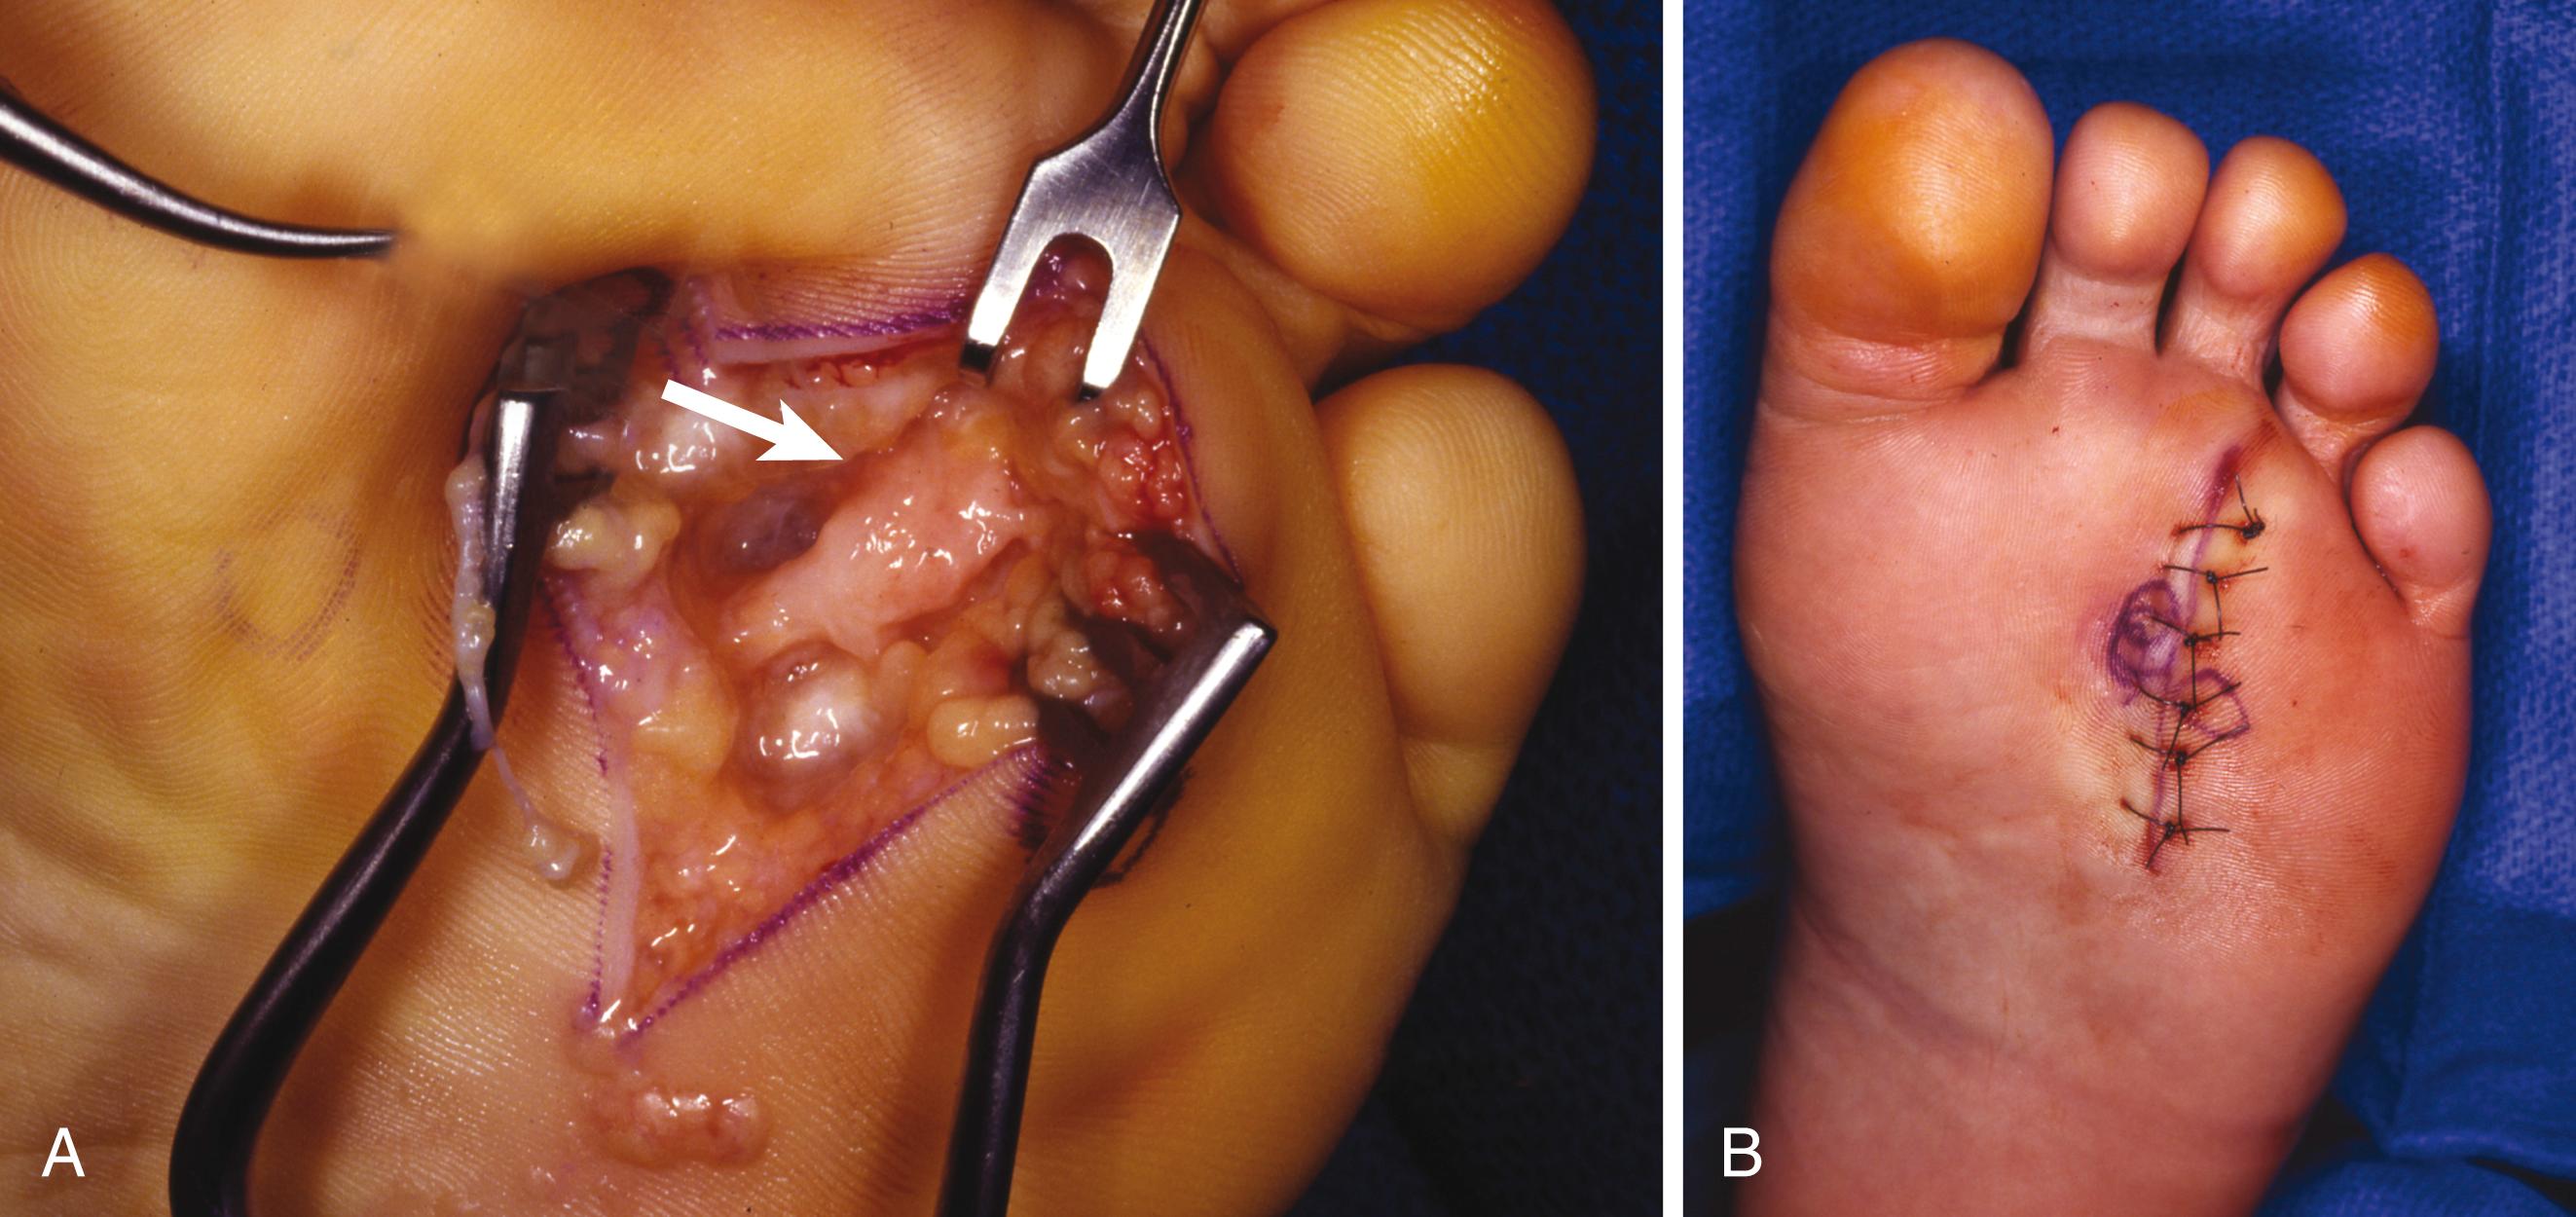 FIGURE 87.12, Interdigital neuroma. A, Plantar incision for “recurrent” interdigital neuroma with communicating nerve entering neuroma (arrow) . B, Closure after neuroma excision. SEE TECHNIQUE 87.5 .